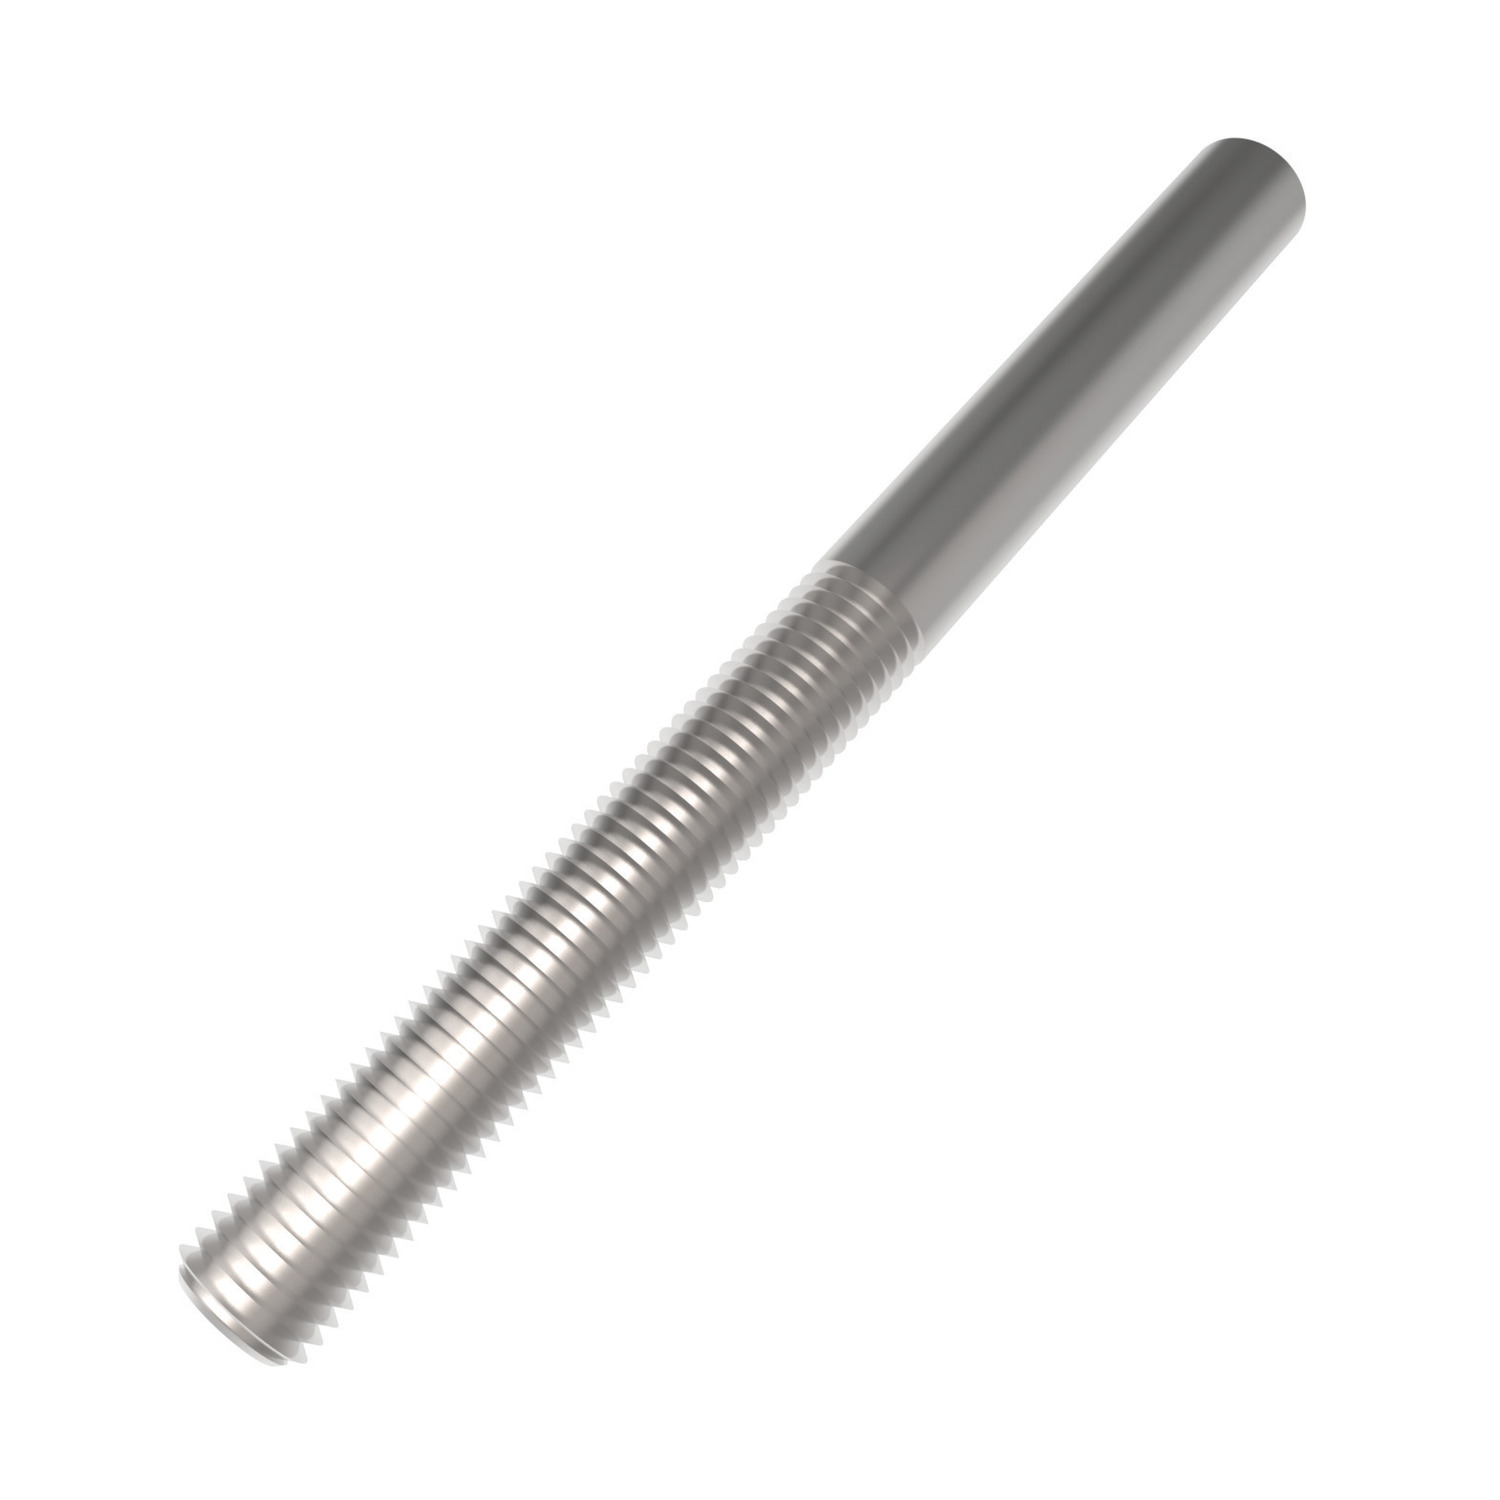 R3866.R036-ZP Welding Studs steel RH M36 Not to be used for lifting unless SWL marked.